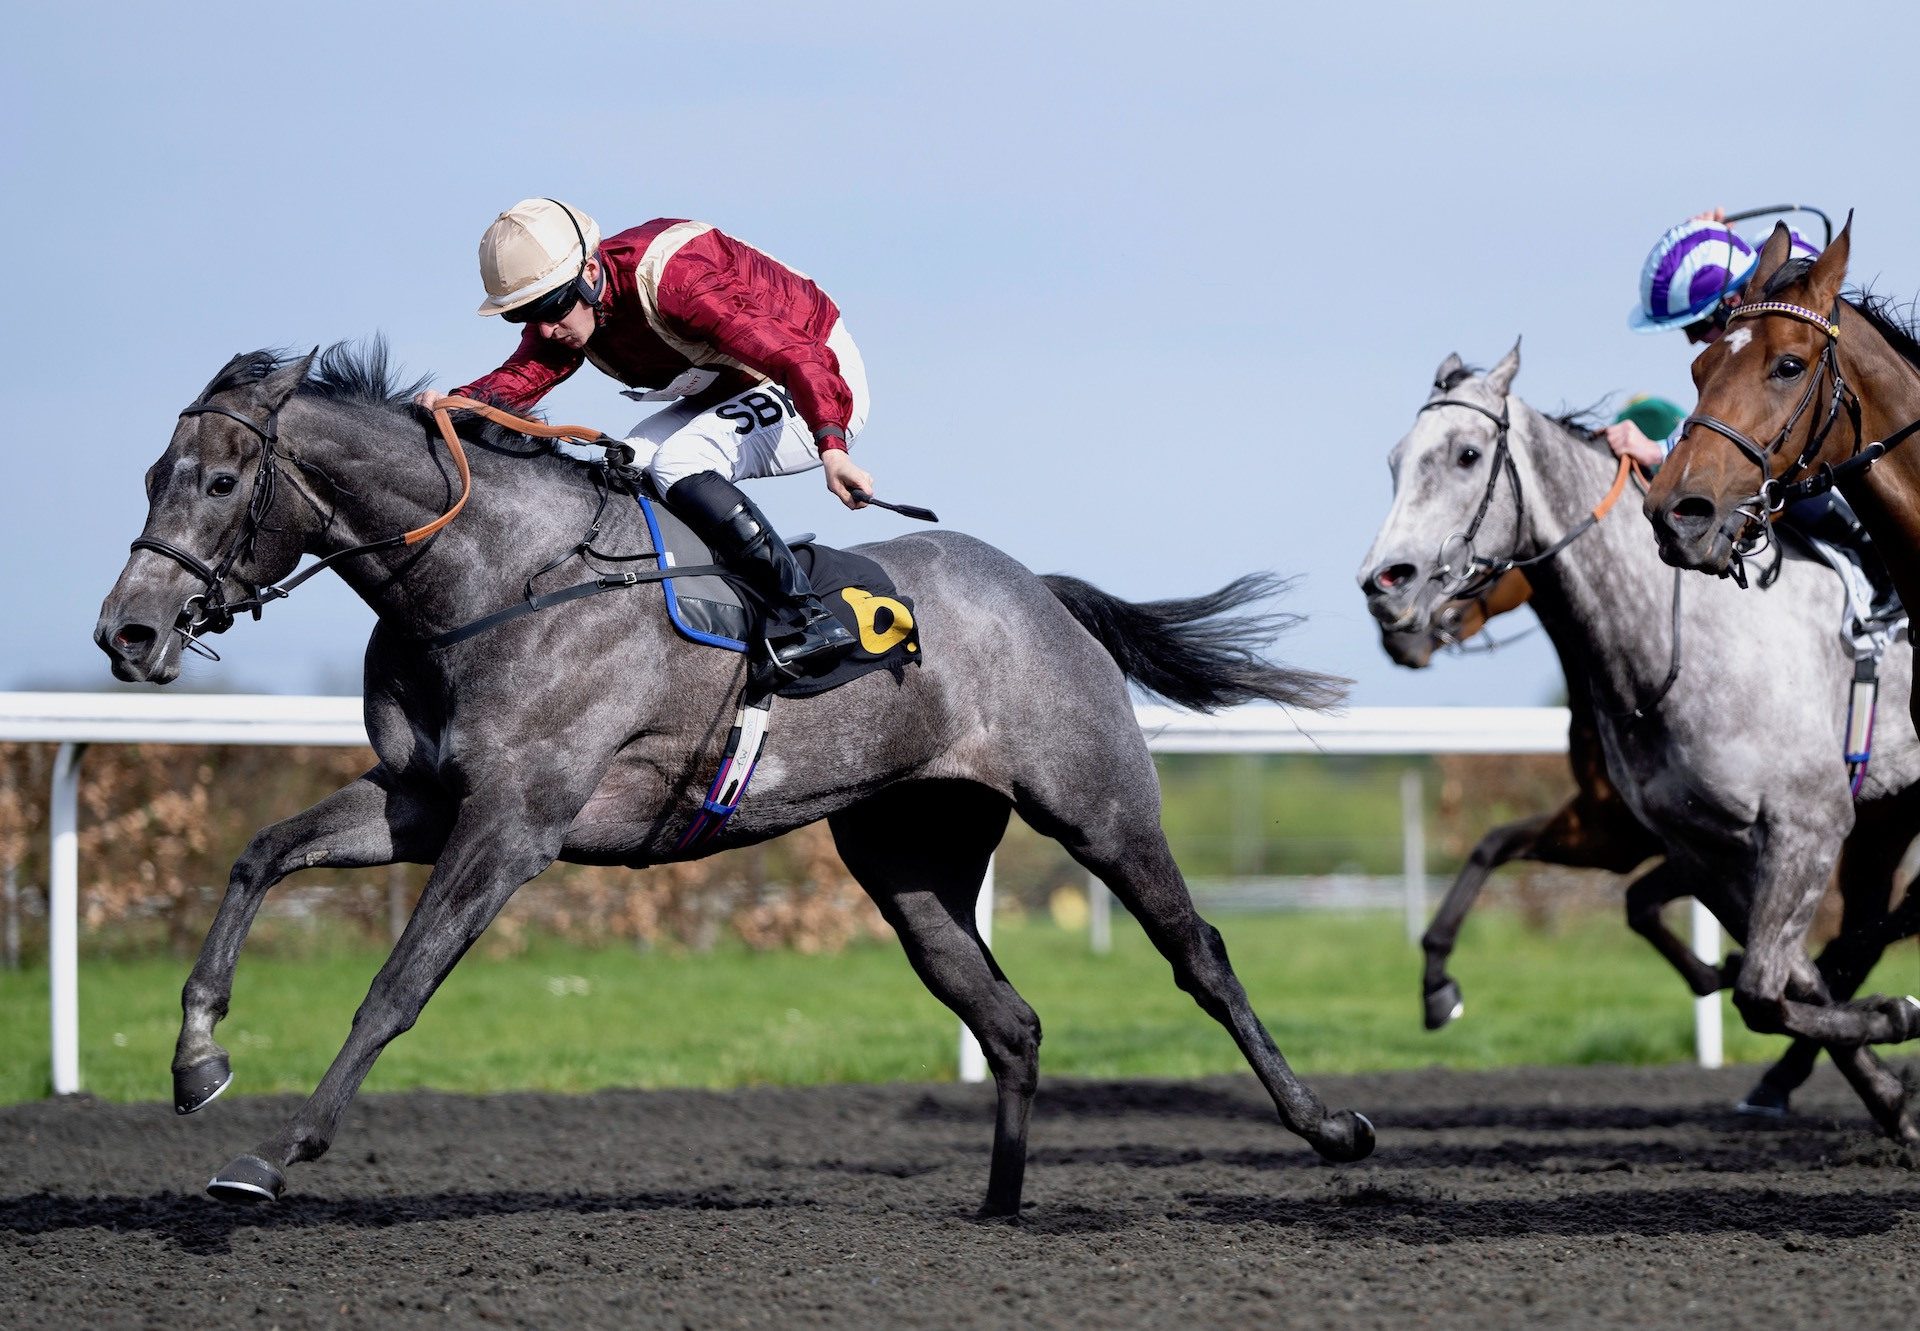 Roman Mist (Holy Roman Emperor) Wins The Listed Snowdrop Fillies’ Stakes At Kempton